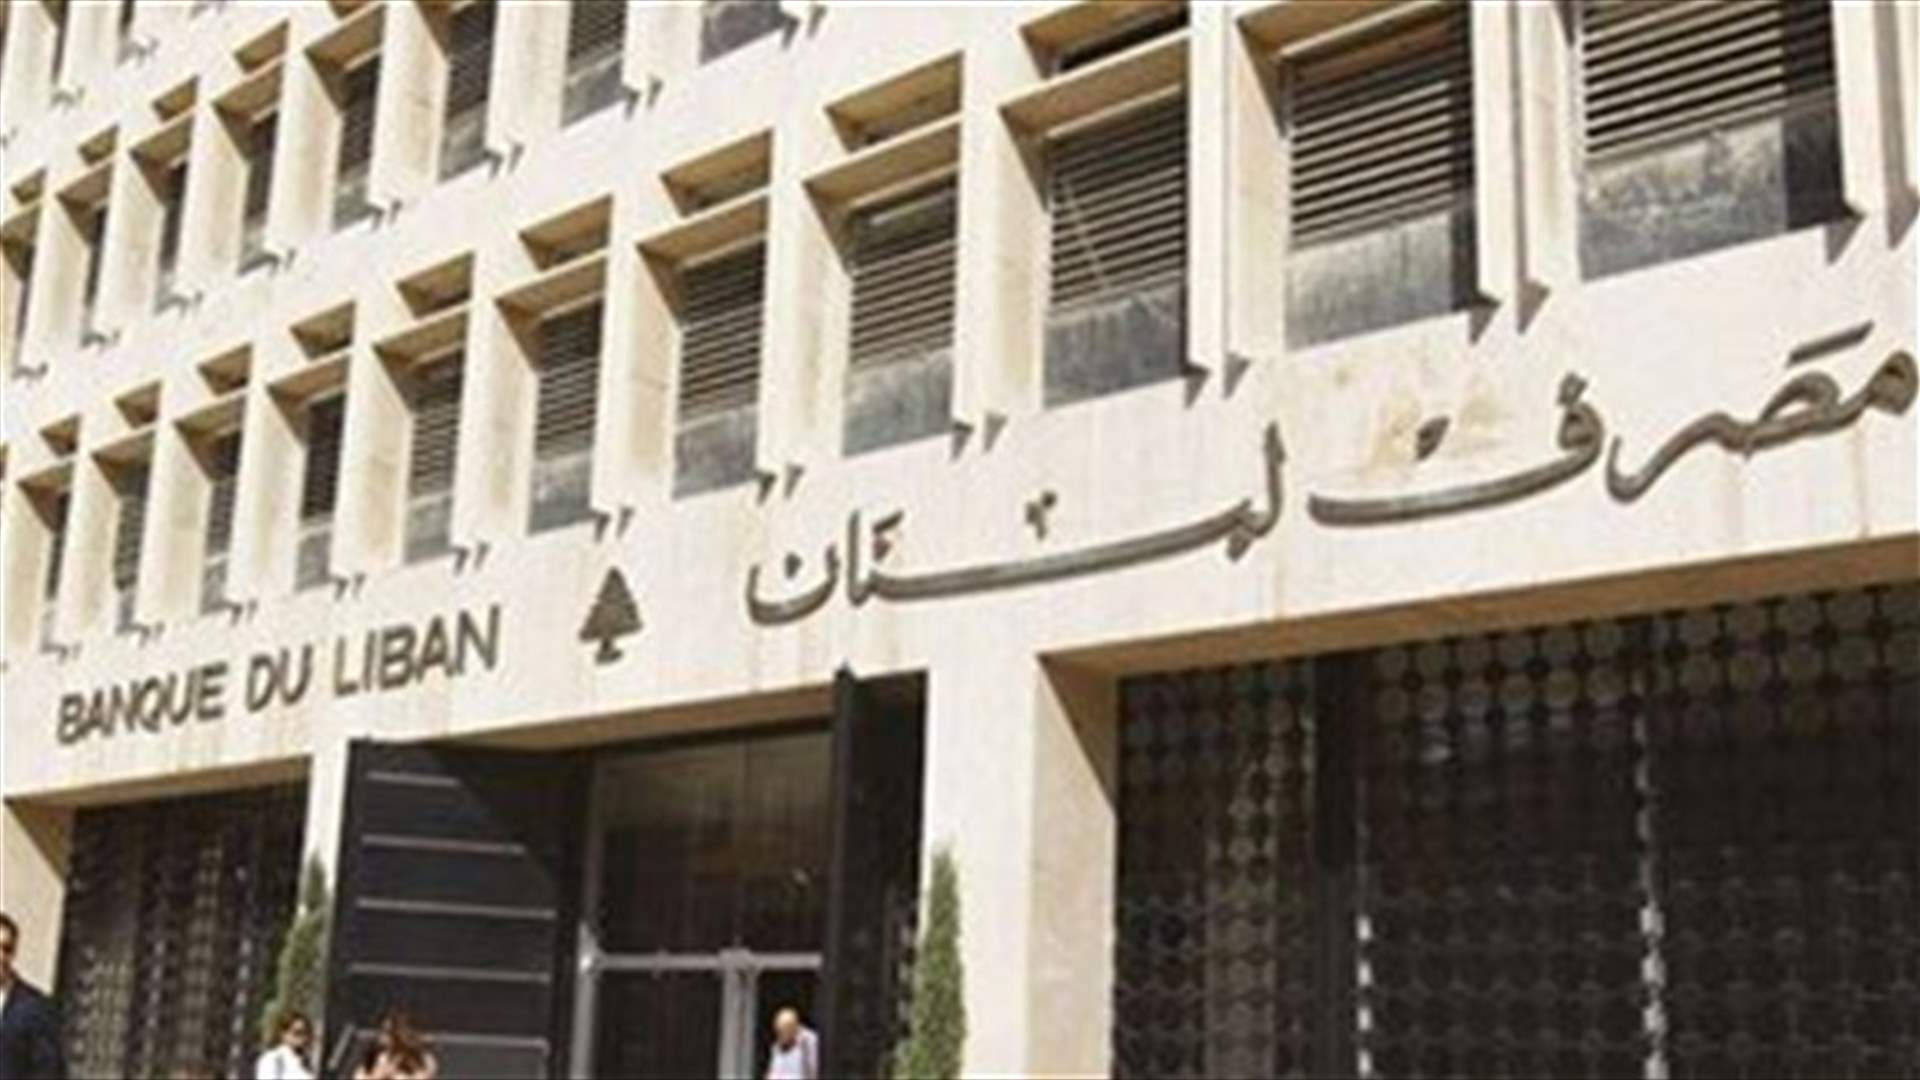 Lebanon&#39;s central bank says it will discuss forensic audit with Alvarez & Marsal on April 6